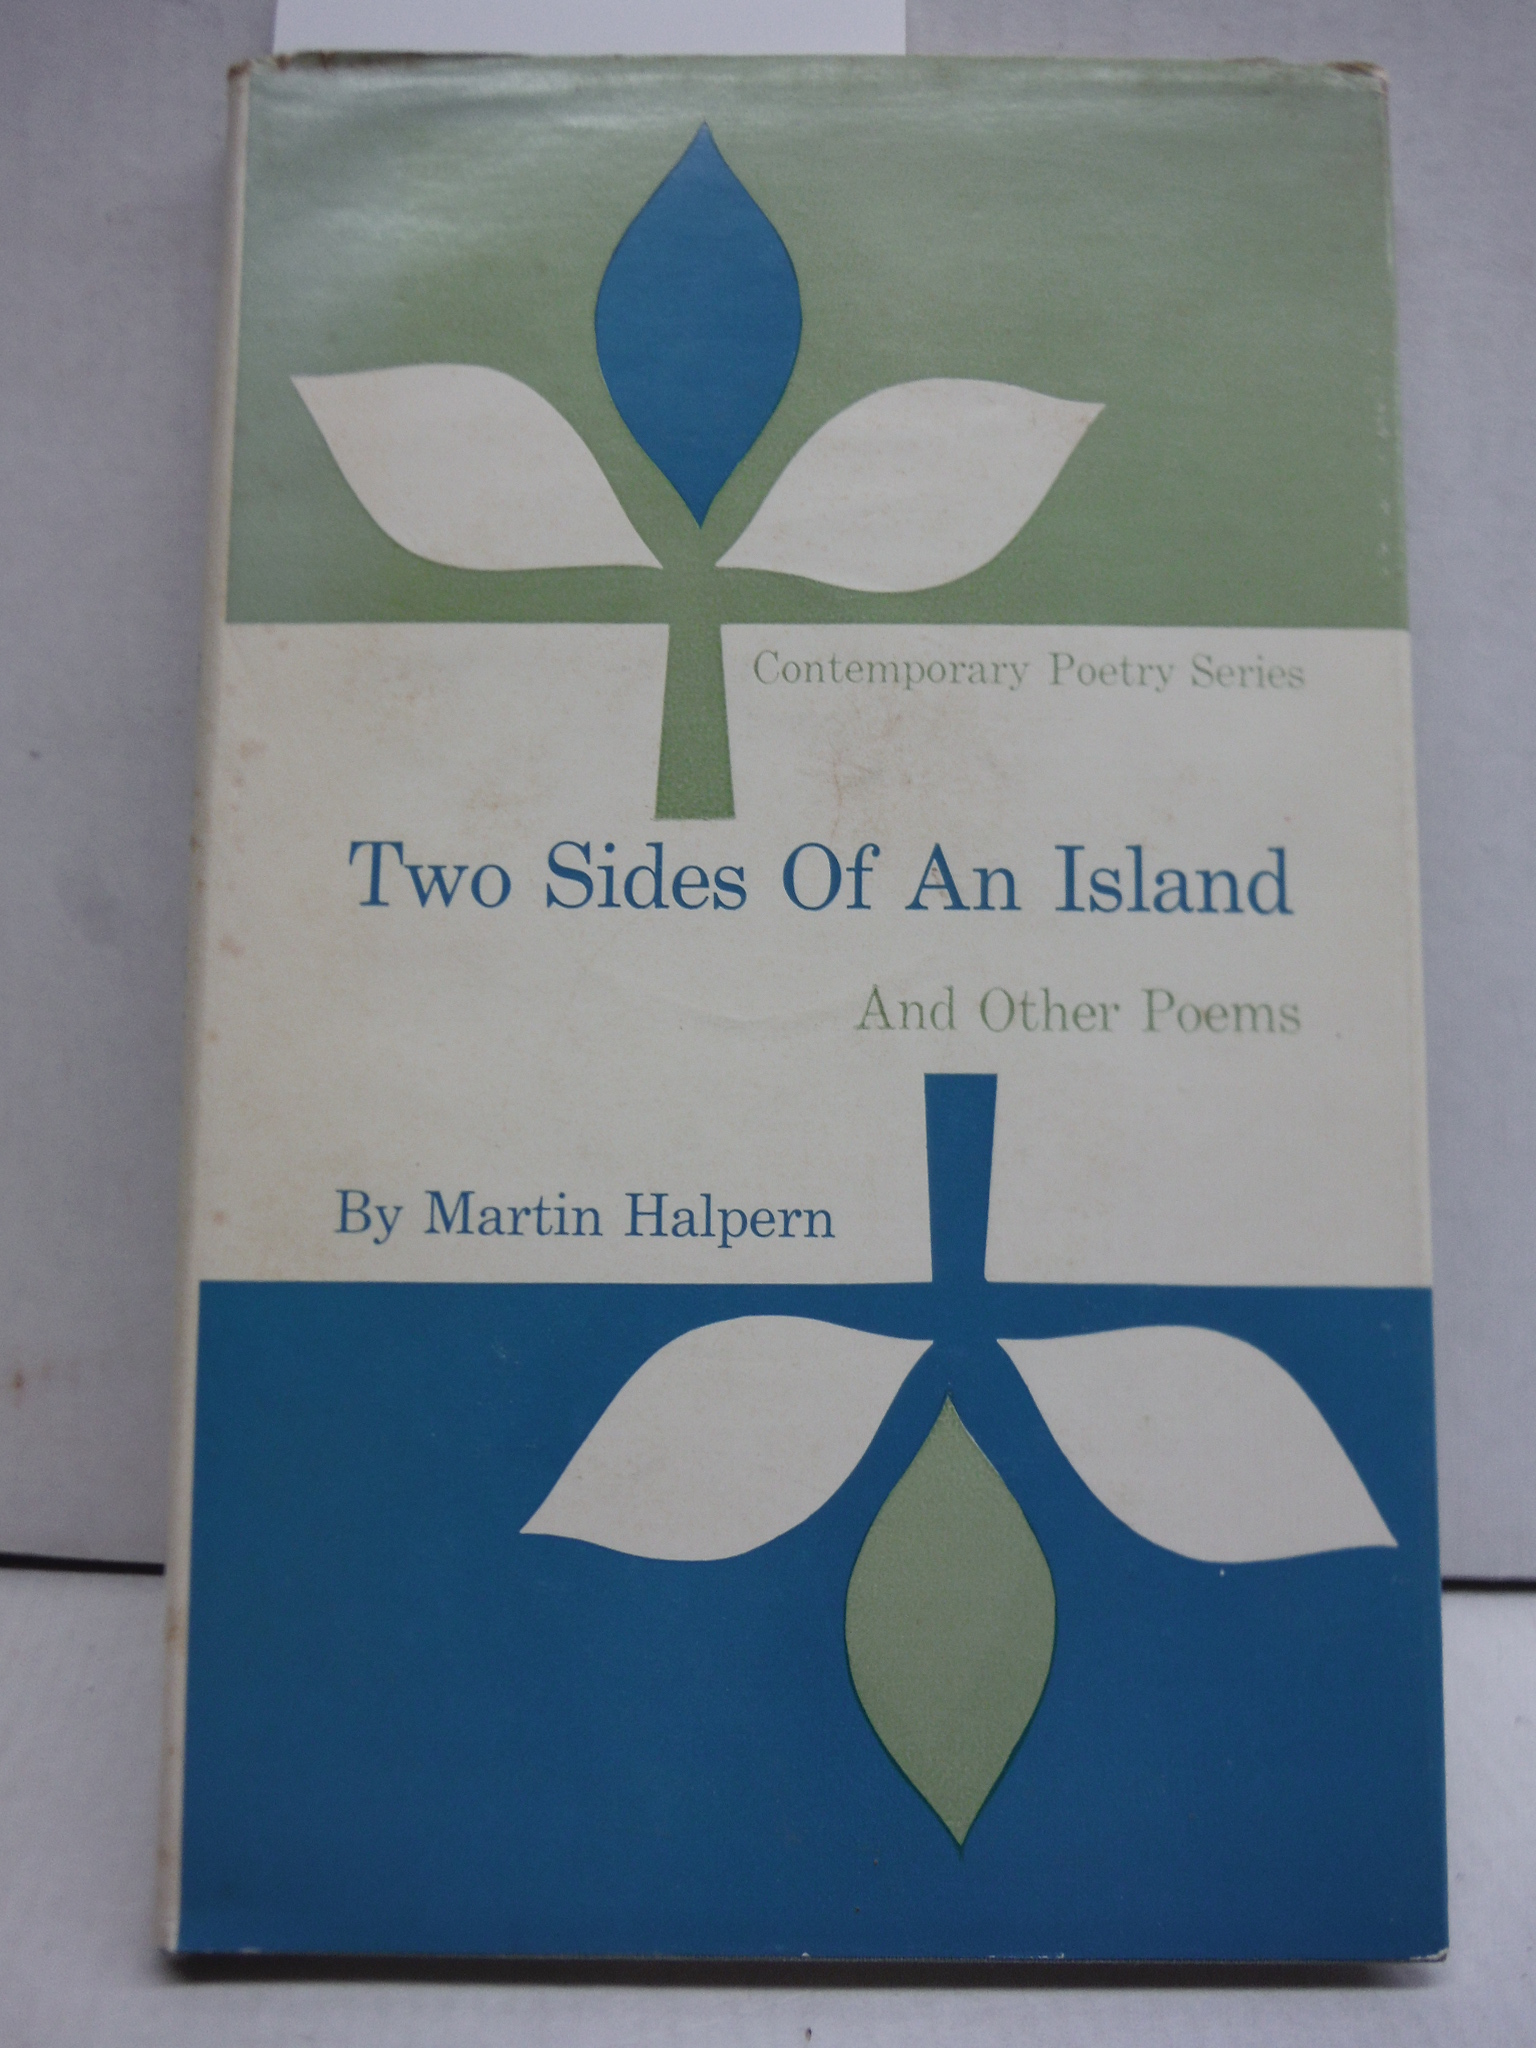 Two Sides of an Island and Other Poems (Contemporary Poetry Series)